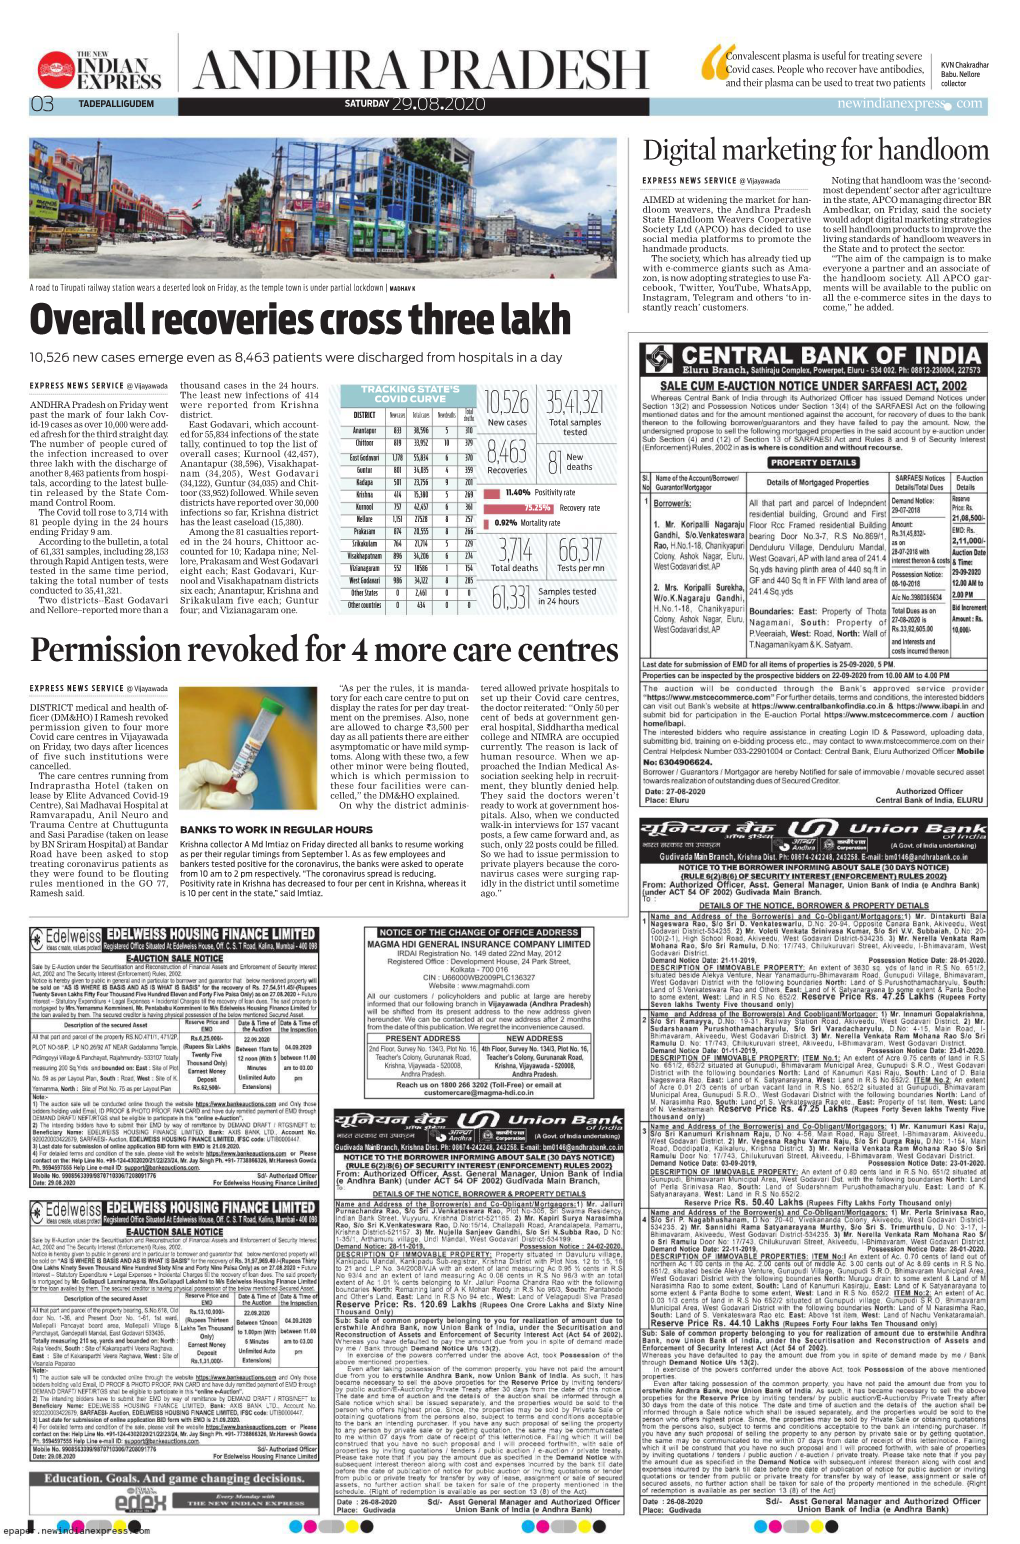 Overall Recoveries Cross Three Lakh Stantly Reach’ Customers